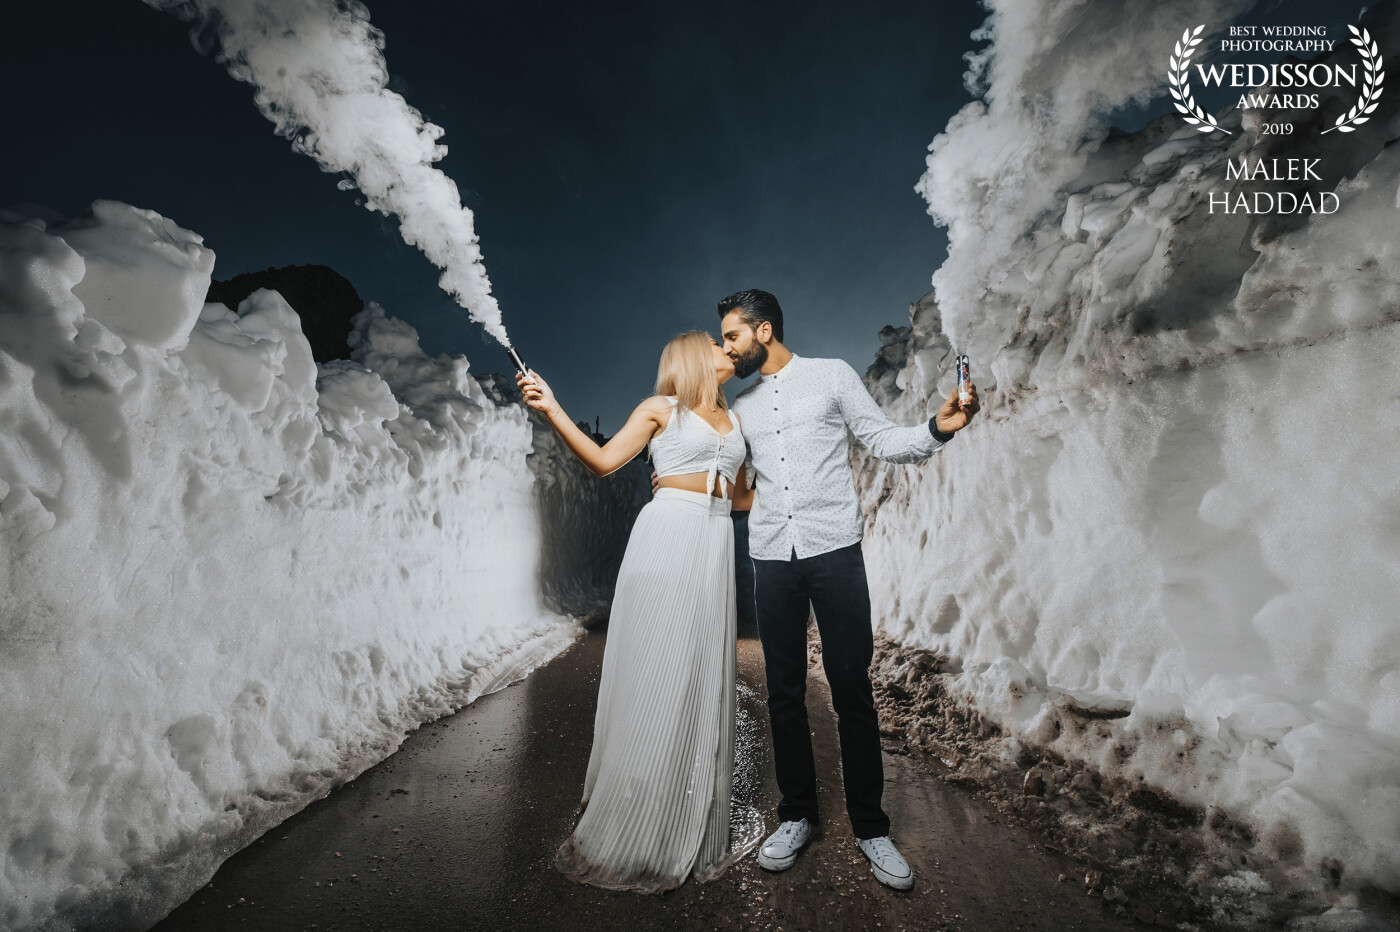 Pre-wedding photo shoots are my favorite because the pictures would always turn out to be spontaneous. We saw this snowy path on our way to the location. I remembered we had white smoke so I just made them stand there in the cold to take the picture. With the smoke, the location and their clothes, I had the perfect combination.